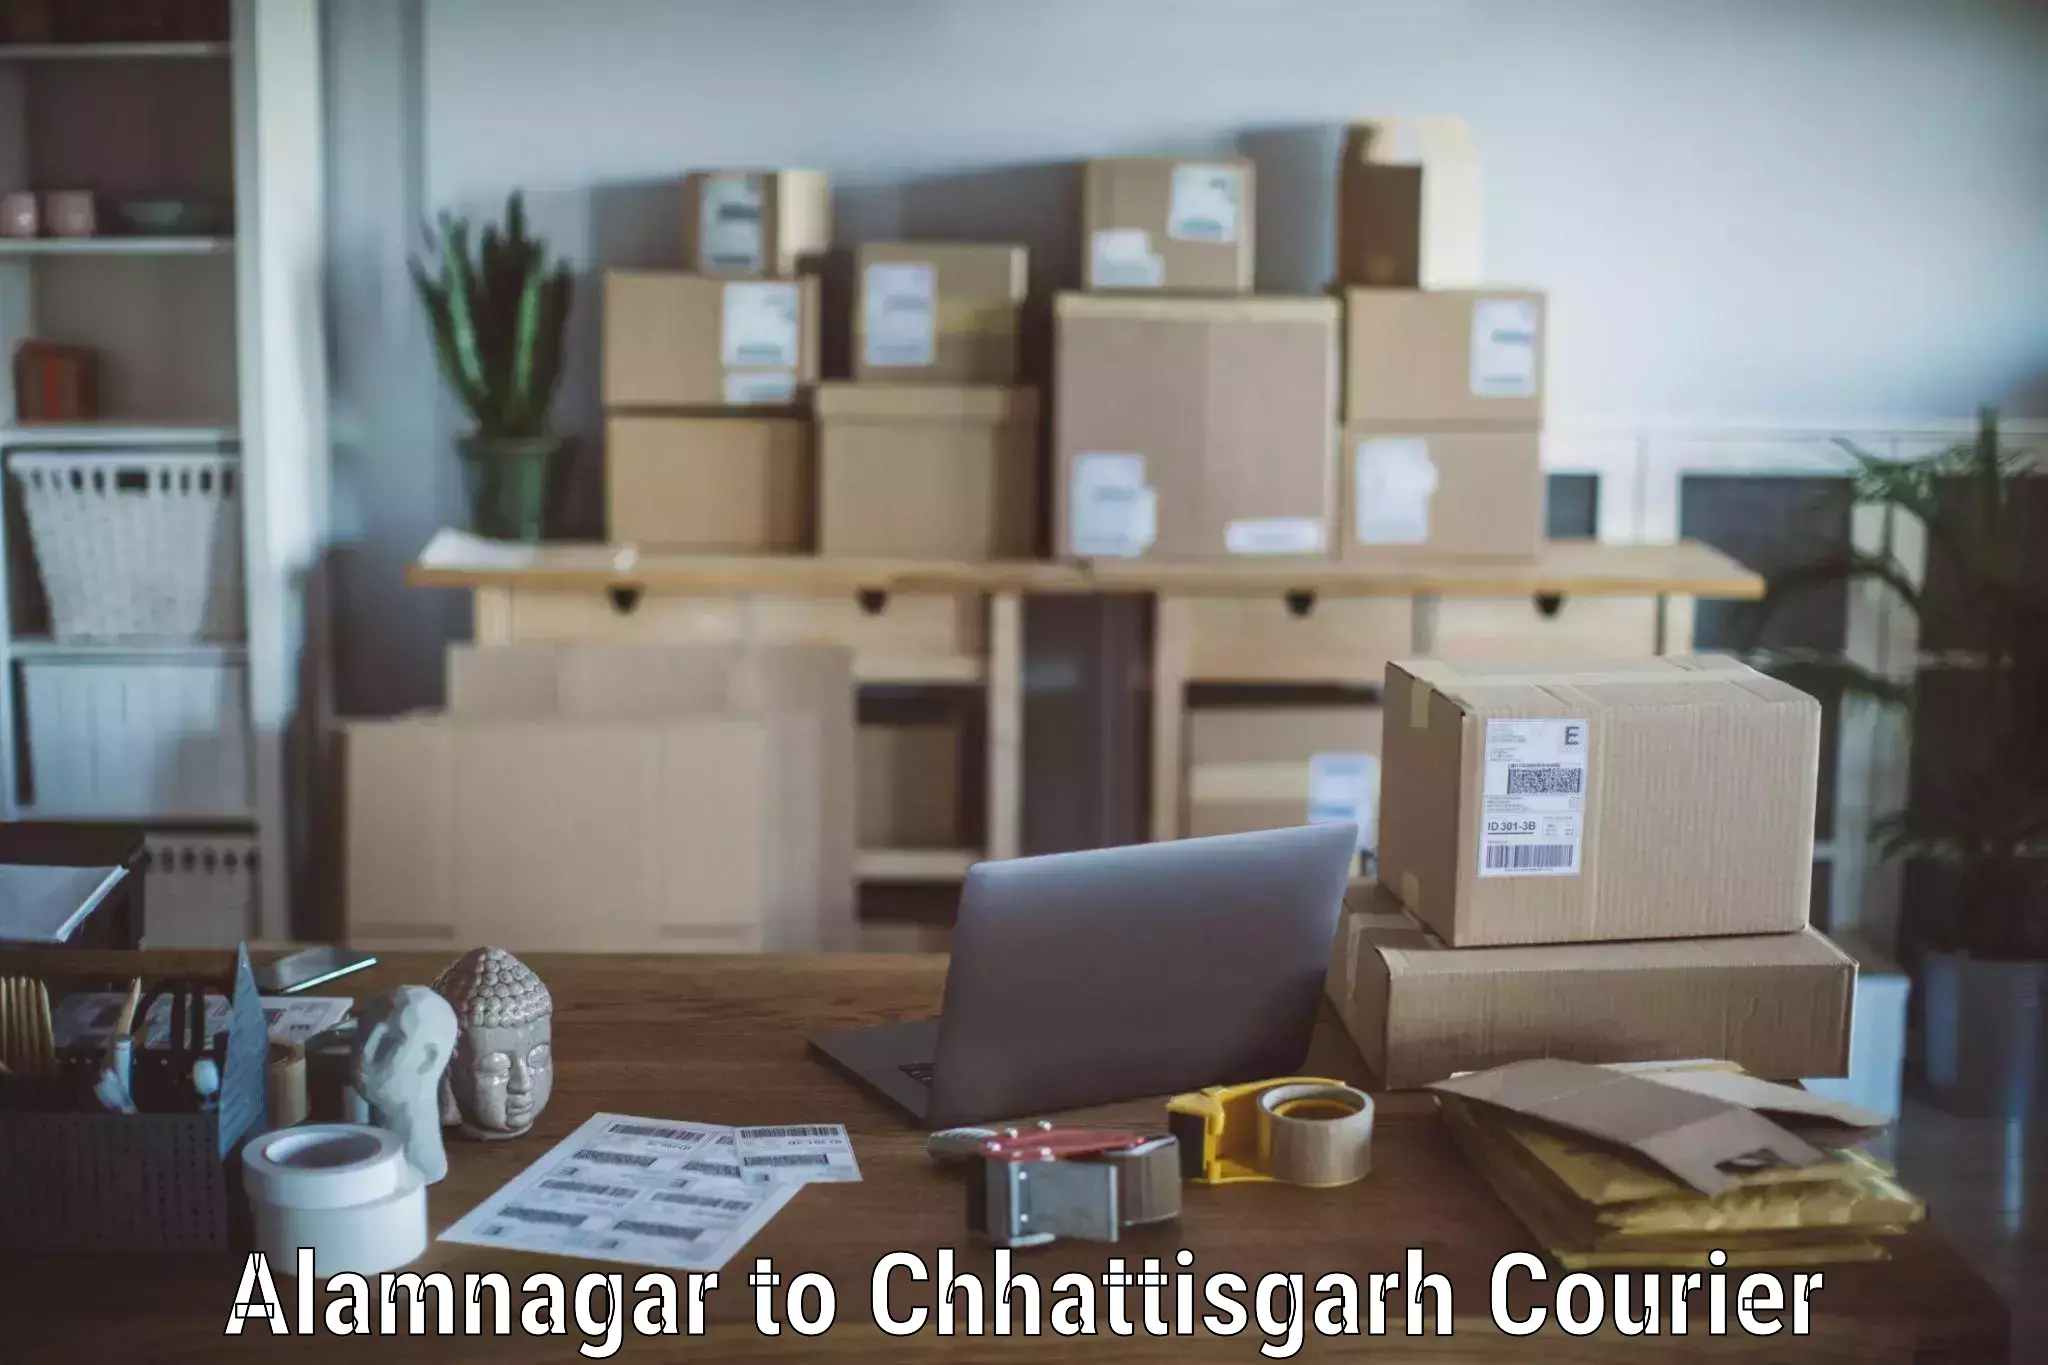 Quality relocation assistance Alamnagar to Dhamtari